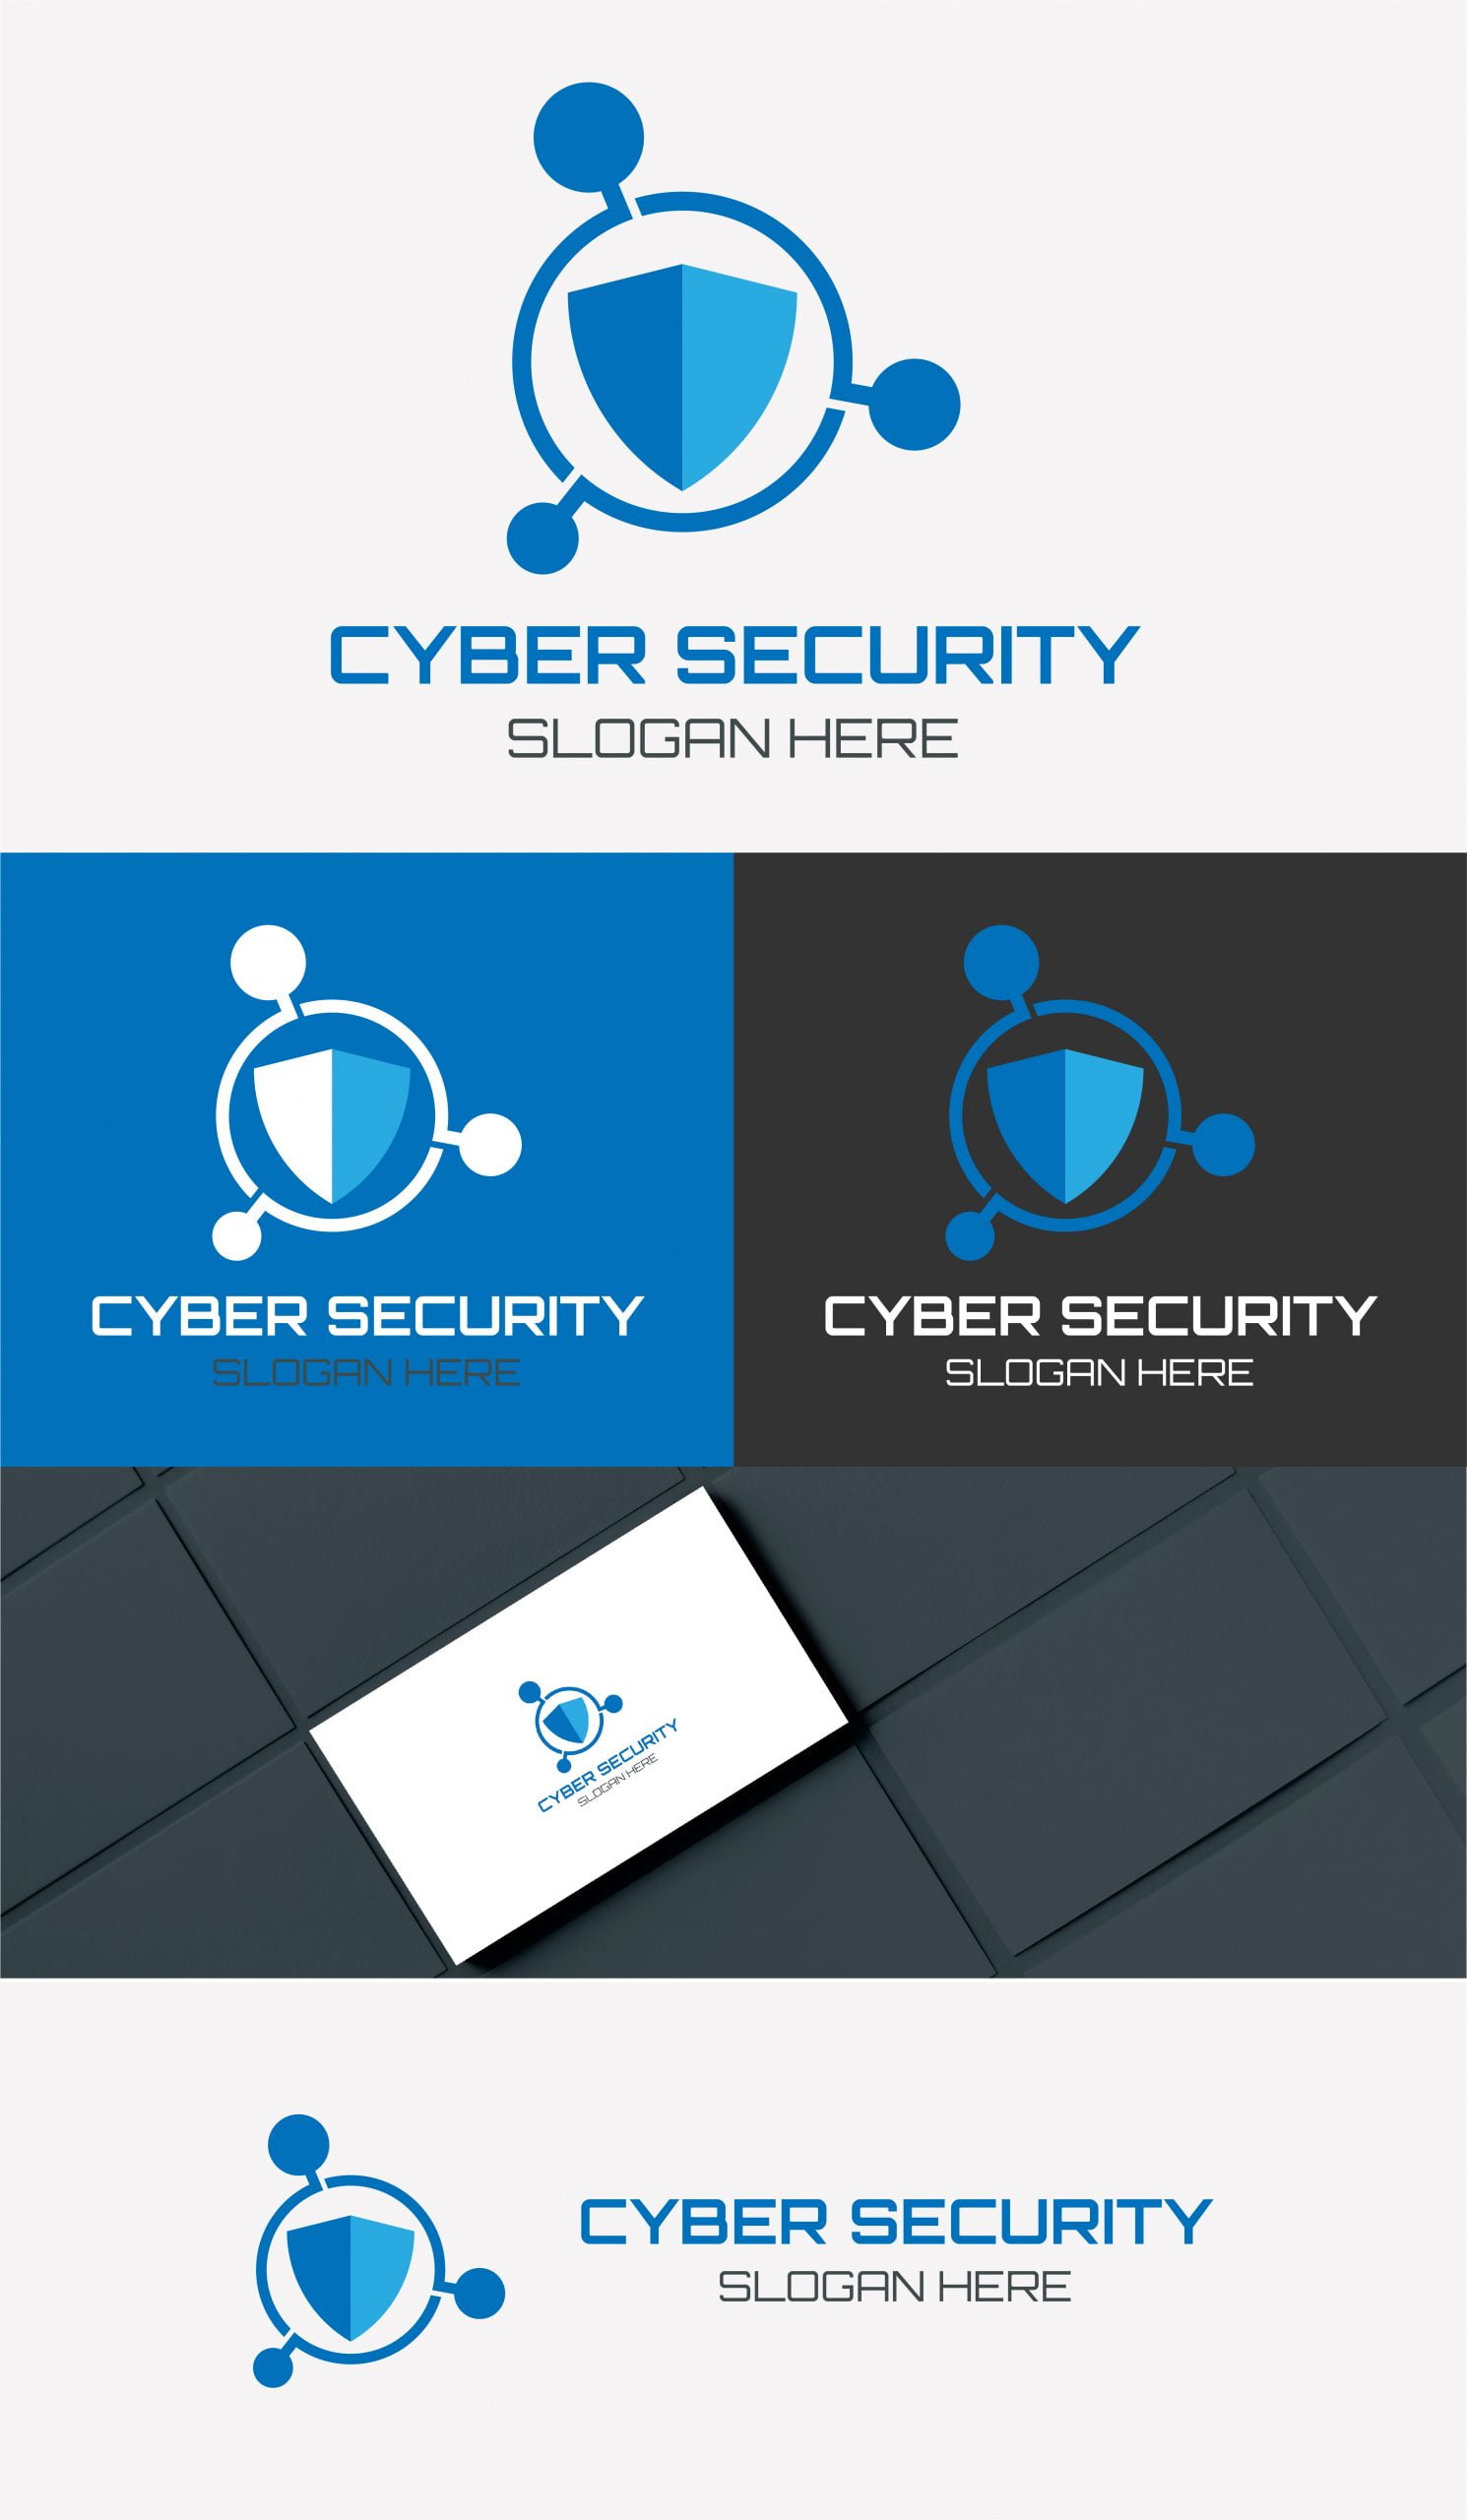 File:Argus Cyber Security logo.svg - Wikipedia